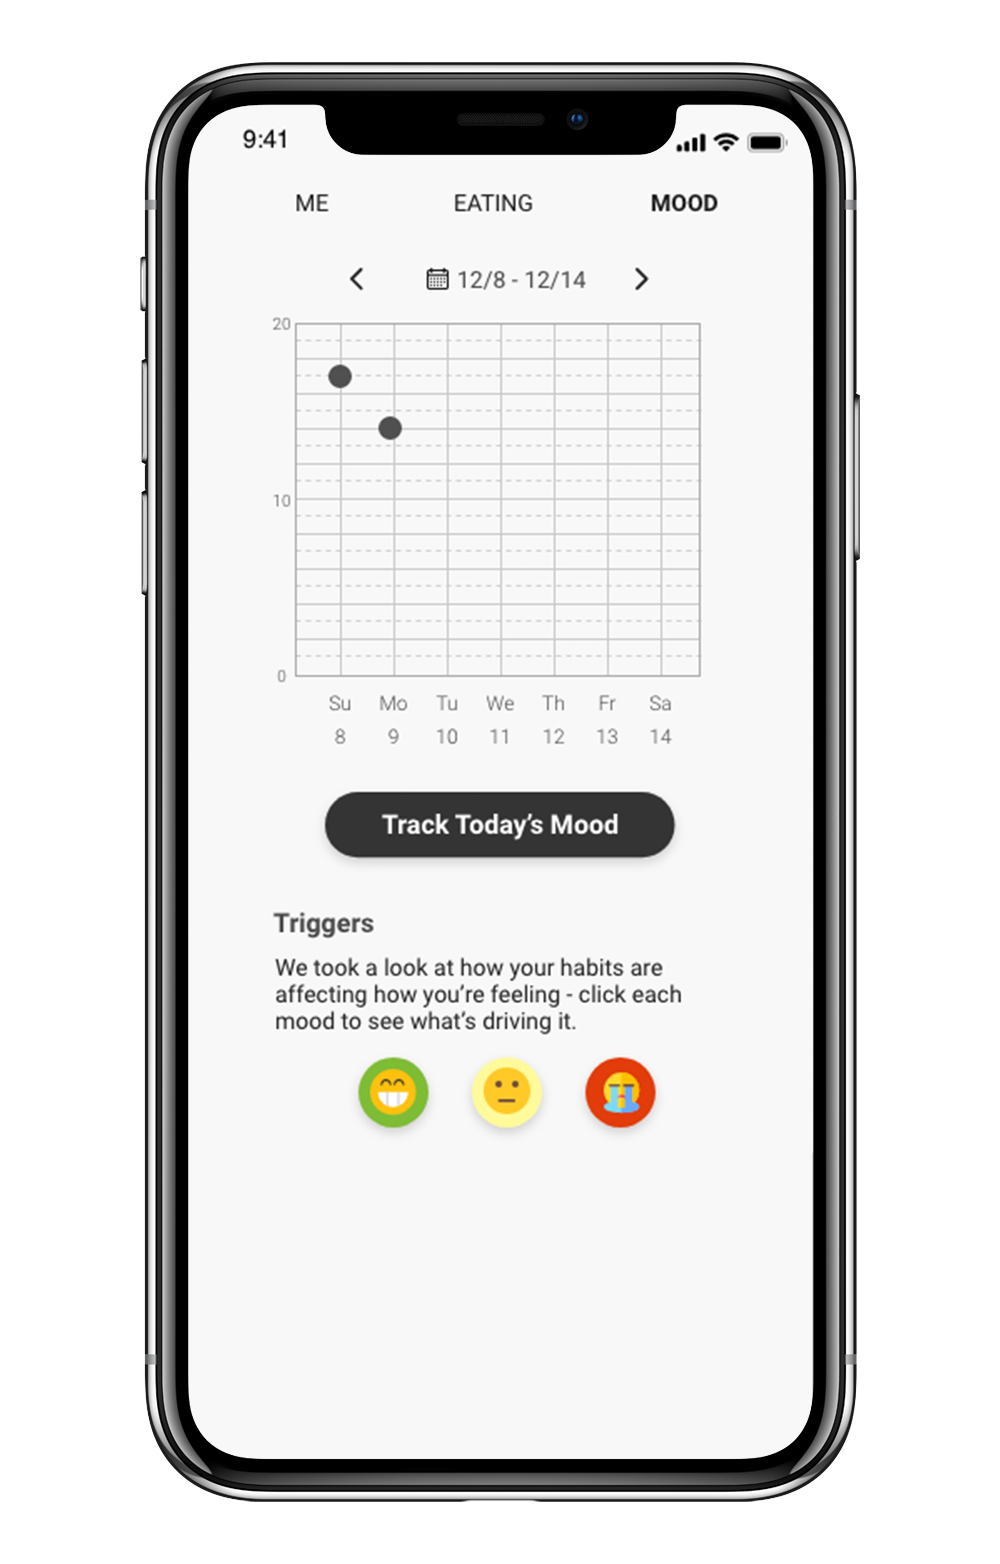 App page showing daily tracking for mood.